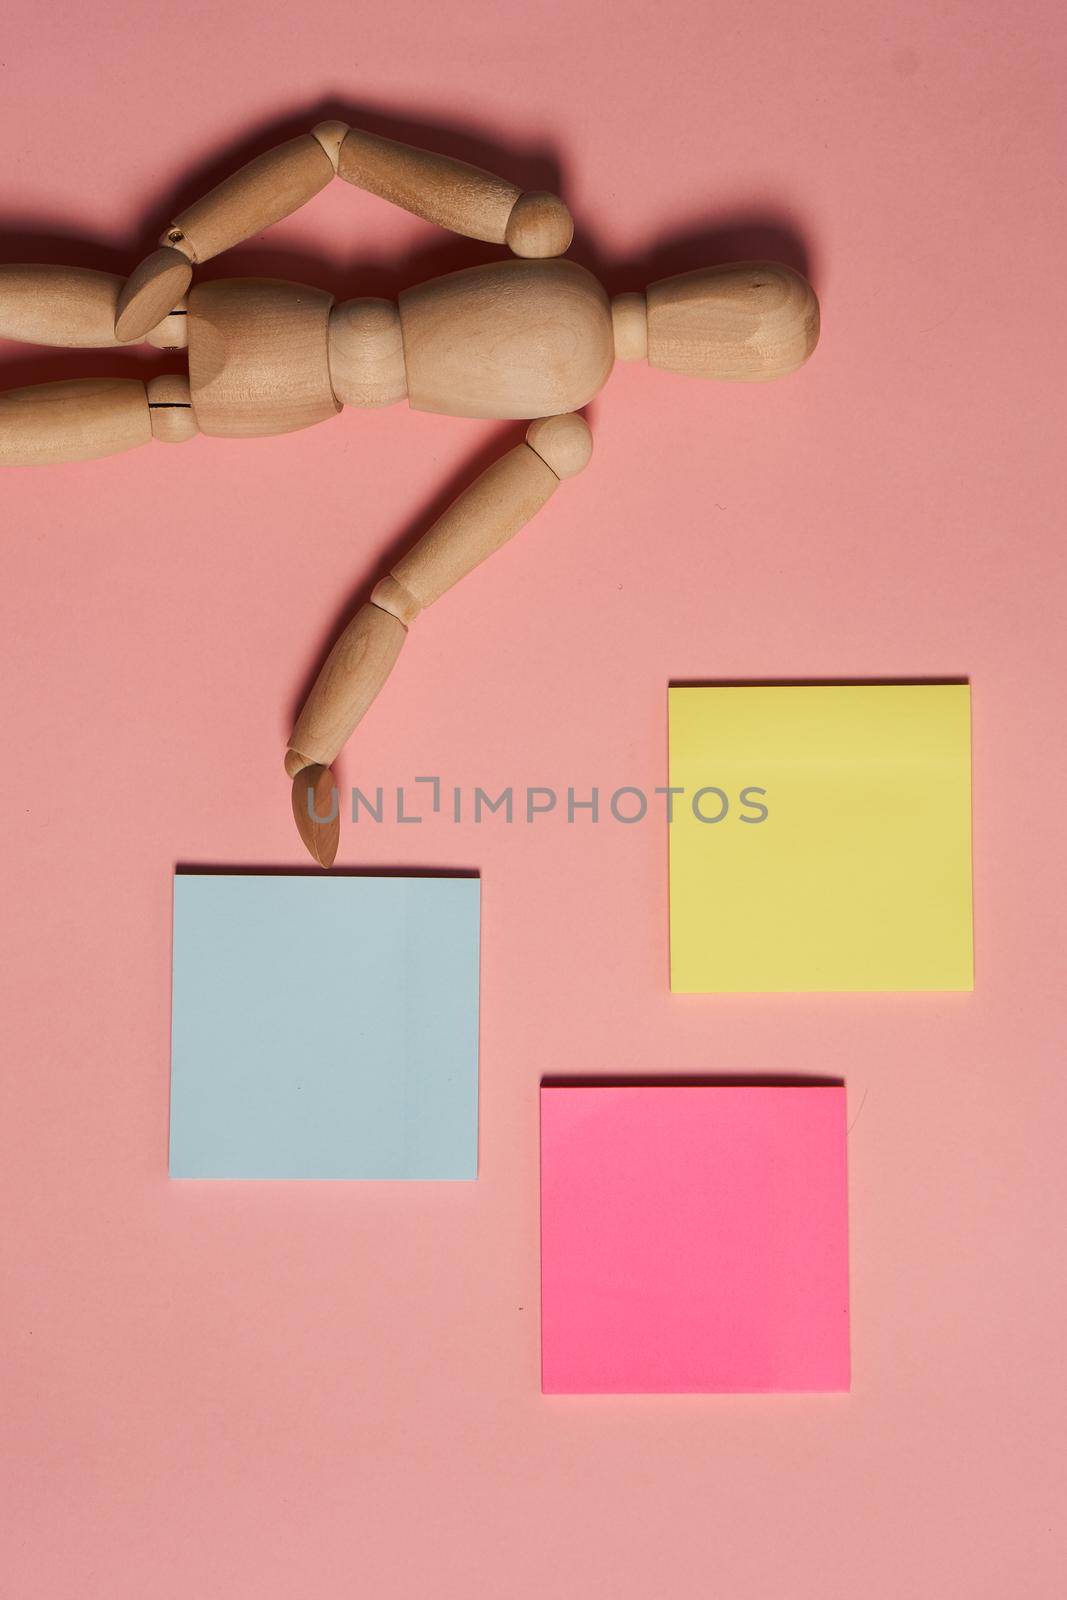 objects of art paint brushes art items abstract paper pink background by Vichizh